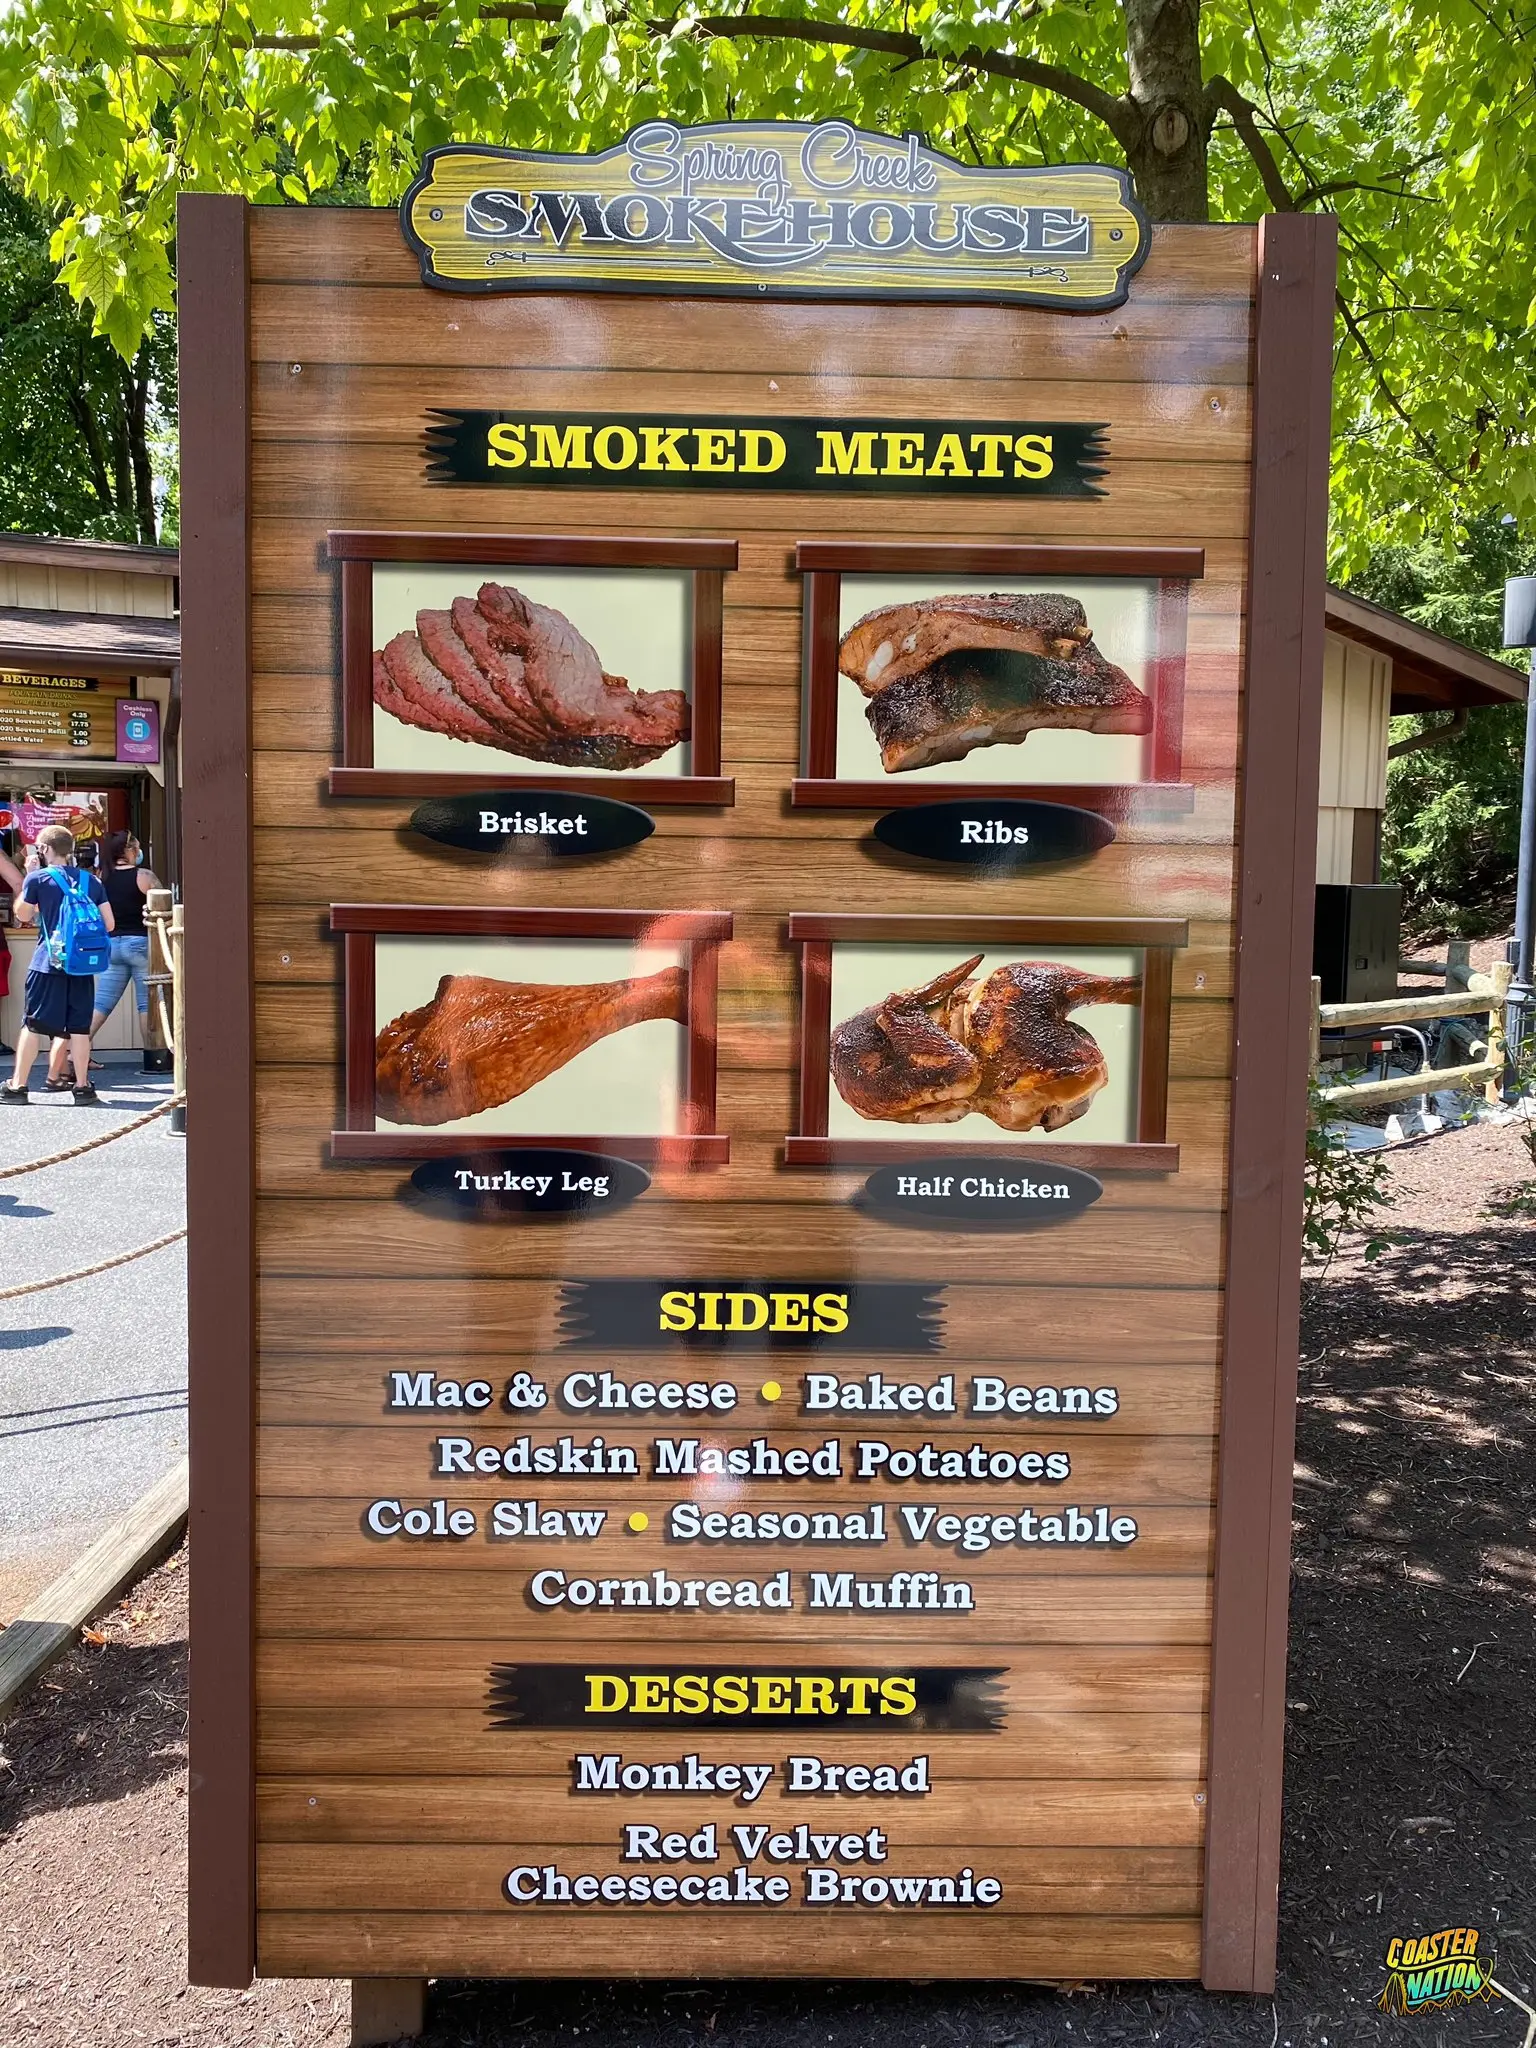 spring creek smokehouse - Do they sell turkey legs at Hershey Park